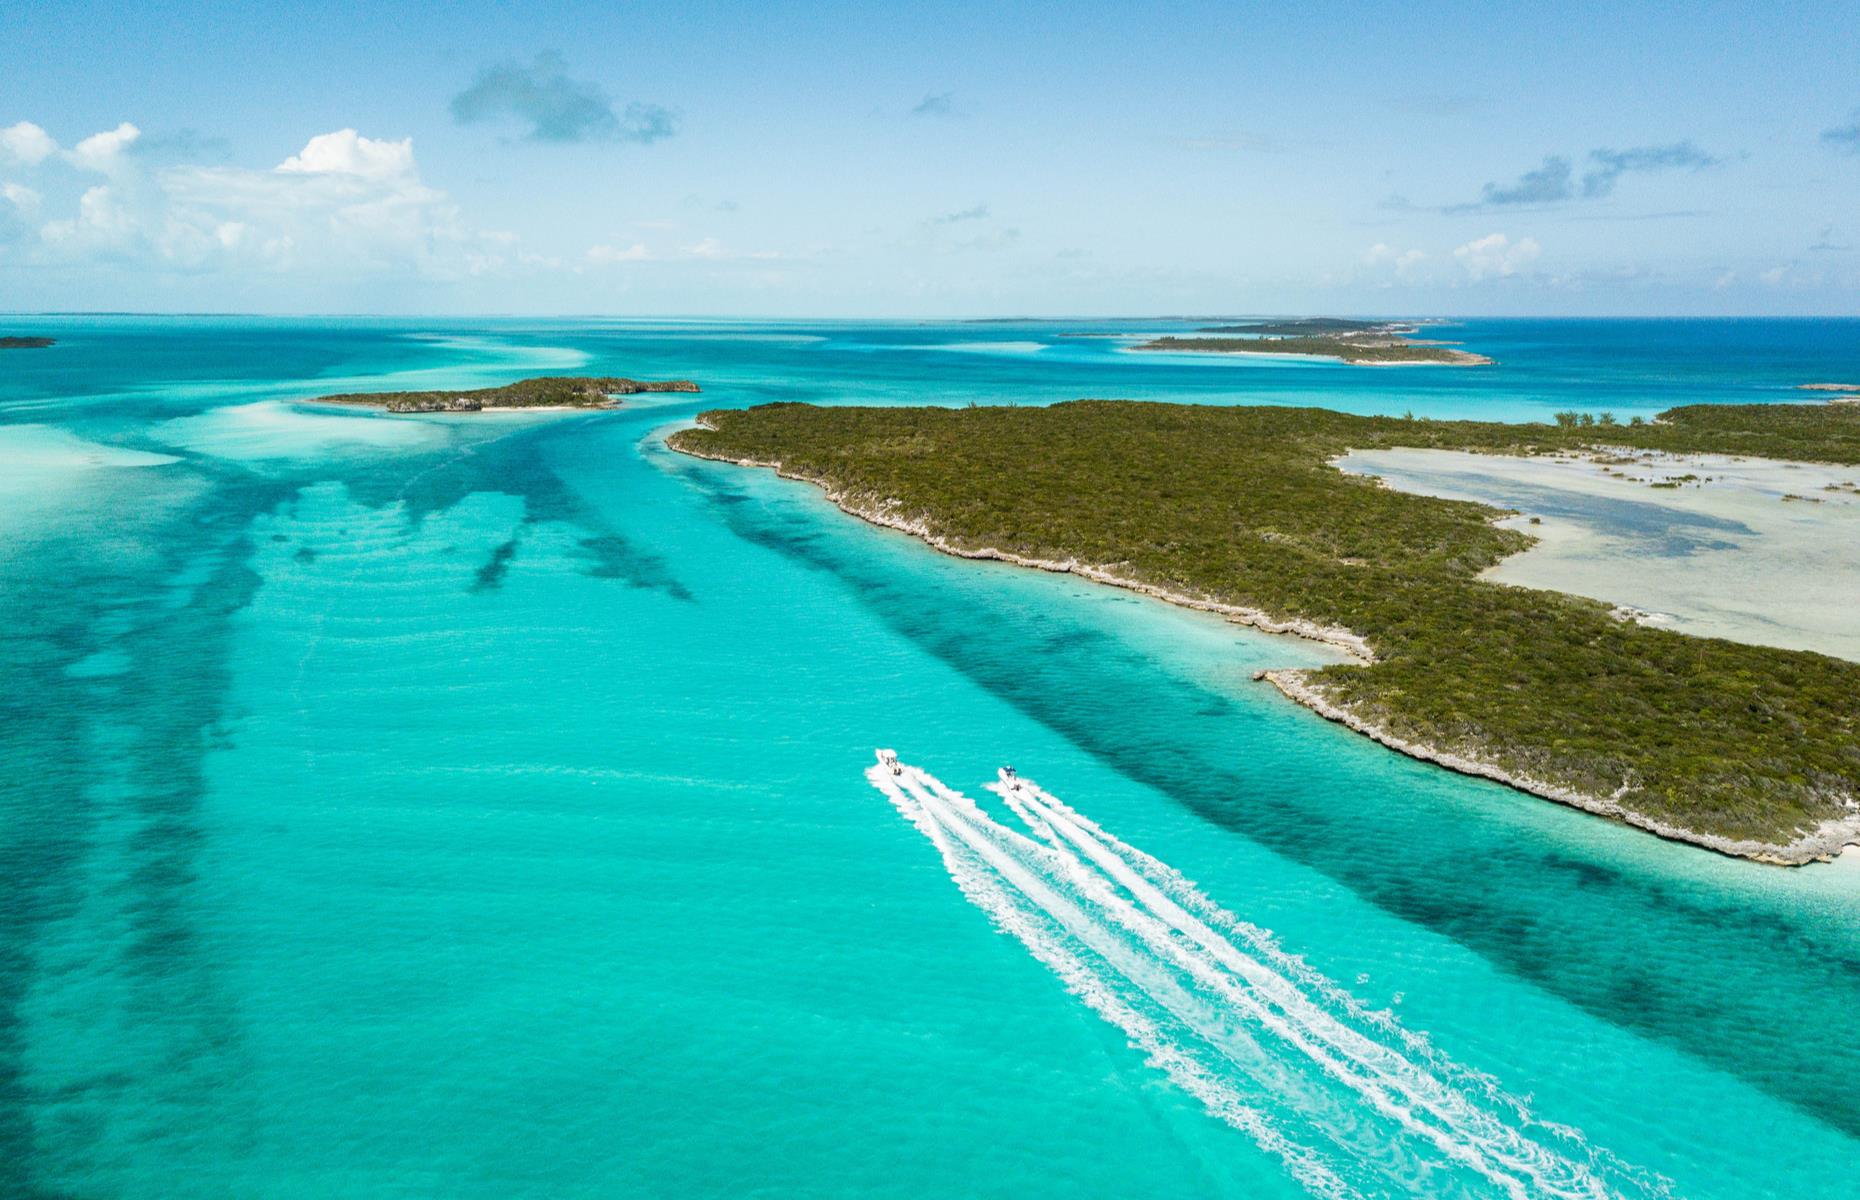 <p>A string of idyllic islands, the beautiful Bahamas makes plenty of appearances in the Bond movie franchise. <em>Thunderball</em> (1965), <em>The Spy Who Loved Me</em> (1977) and <em>Never Say Never Again </em>(1983) all featured some filming on location in the Caribbean archipelago. Capital Nassau with its yacht-filled harbor and glitzy resorts, appears many times, including in <em>Thunderball</em>'s underwater fight. The port city on New Providence Island was also home to Bond star Sean Connery, who was a long-time resident in its ultra-exclusive Lyford Cay Club.</p>